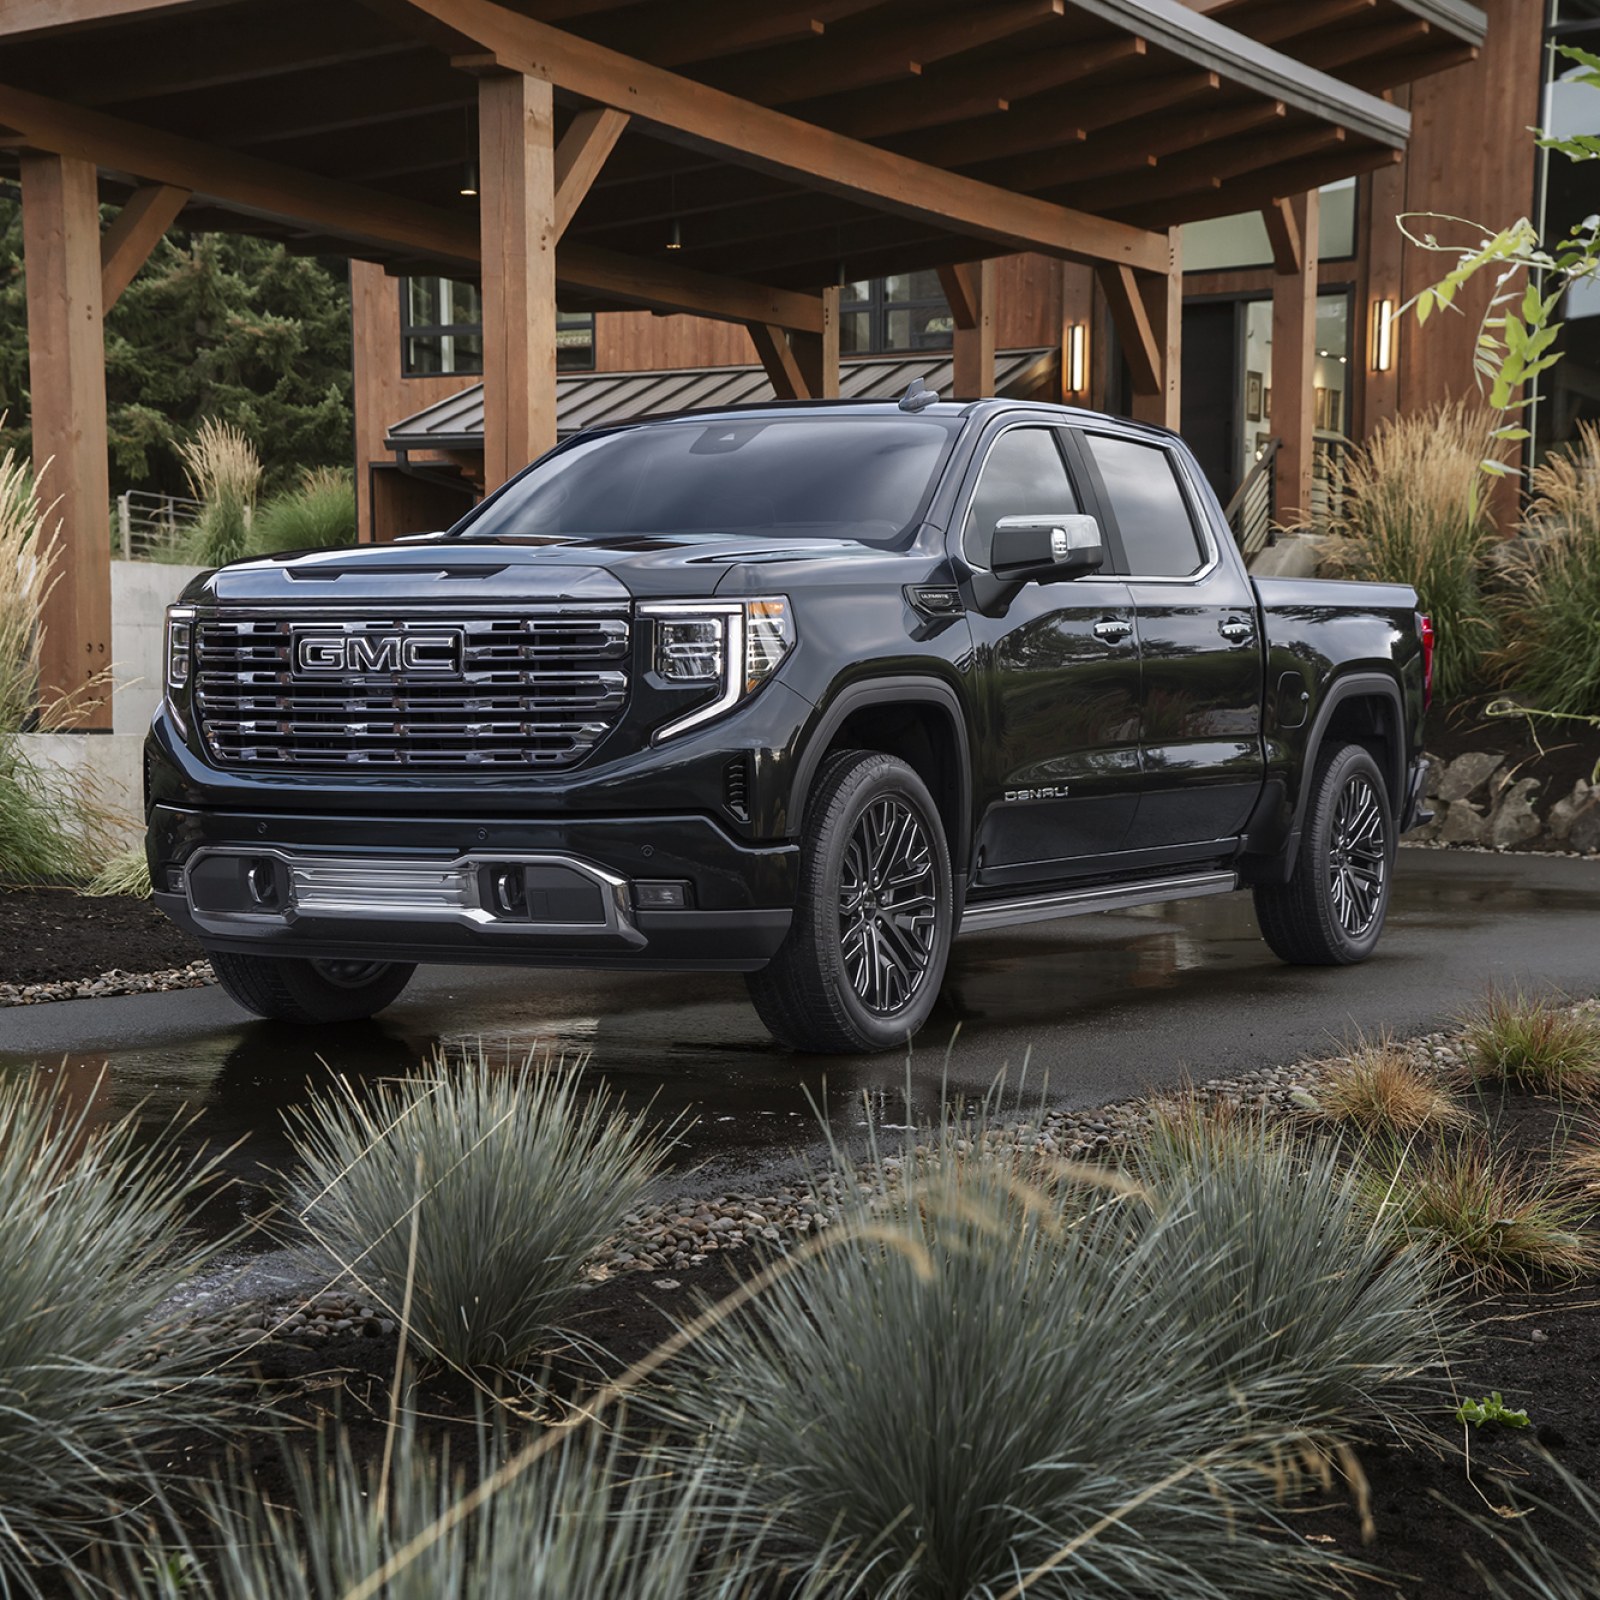 Substantially Revised 2022 Sierra 1500 Firmly Pushes GMC Into Luxury Truck  Territory